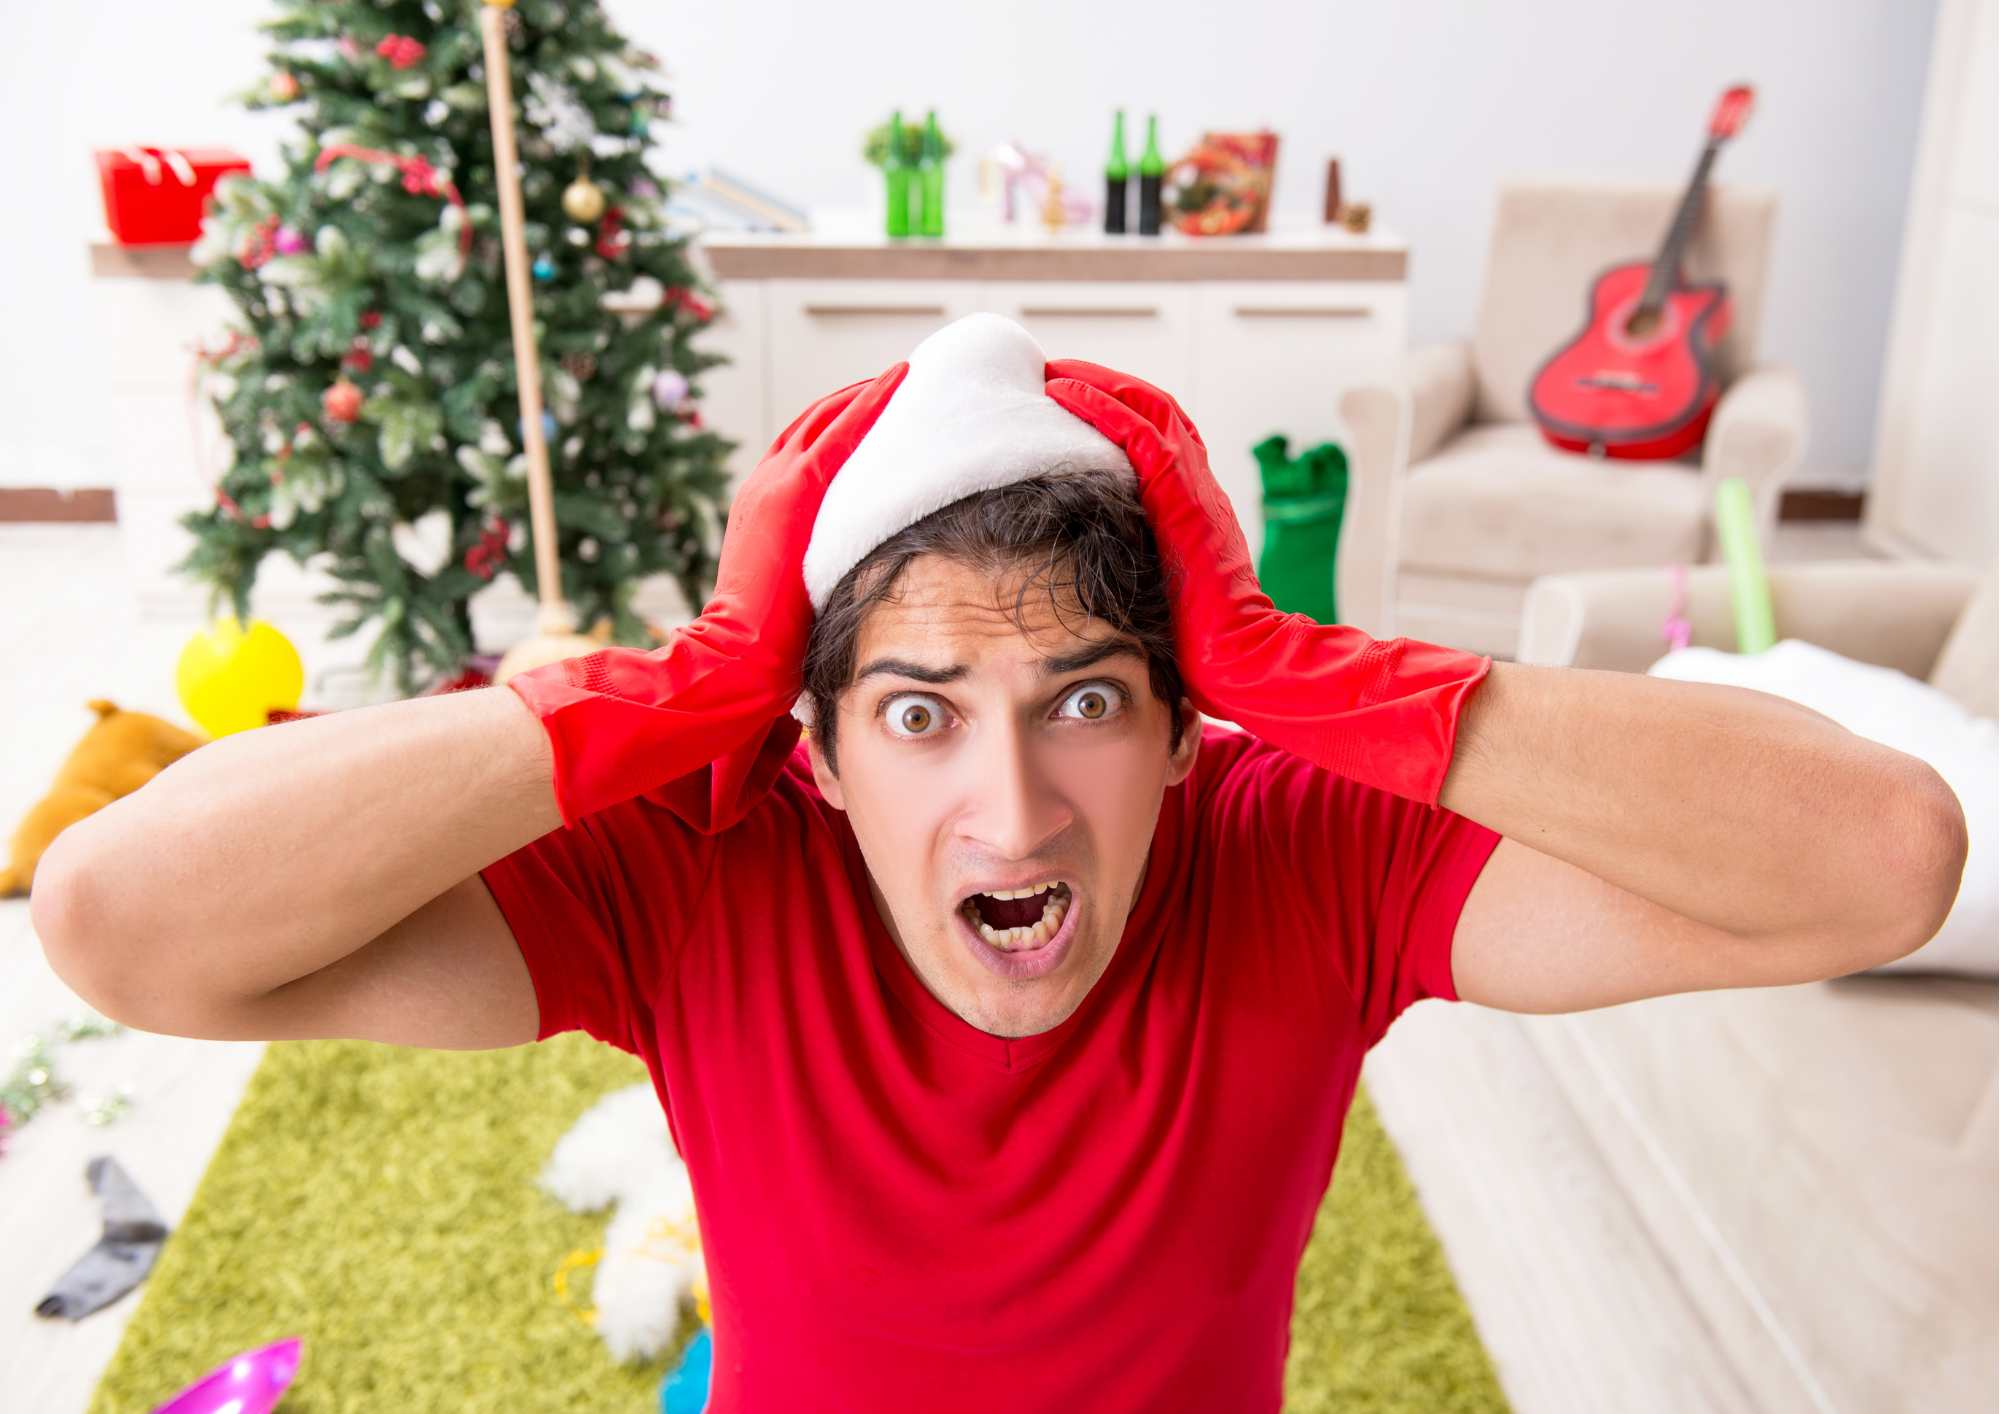 Last Minute Christmas Cleaning Tips